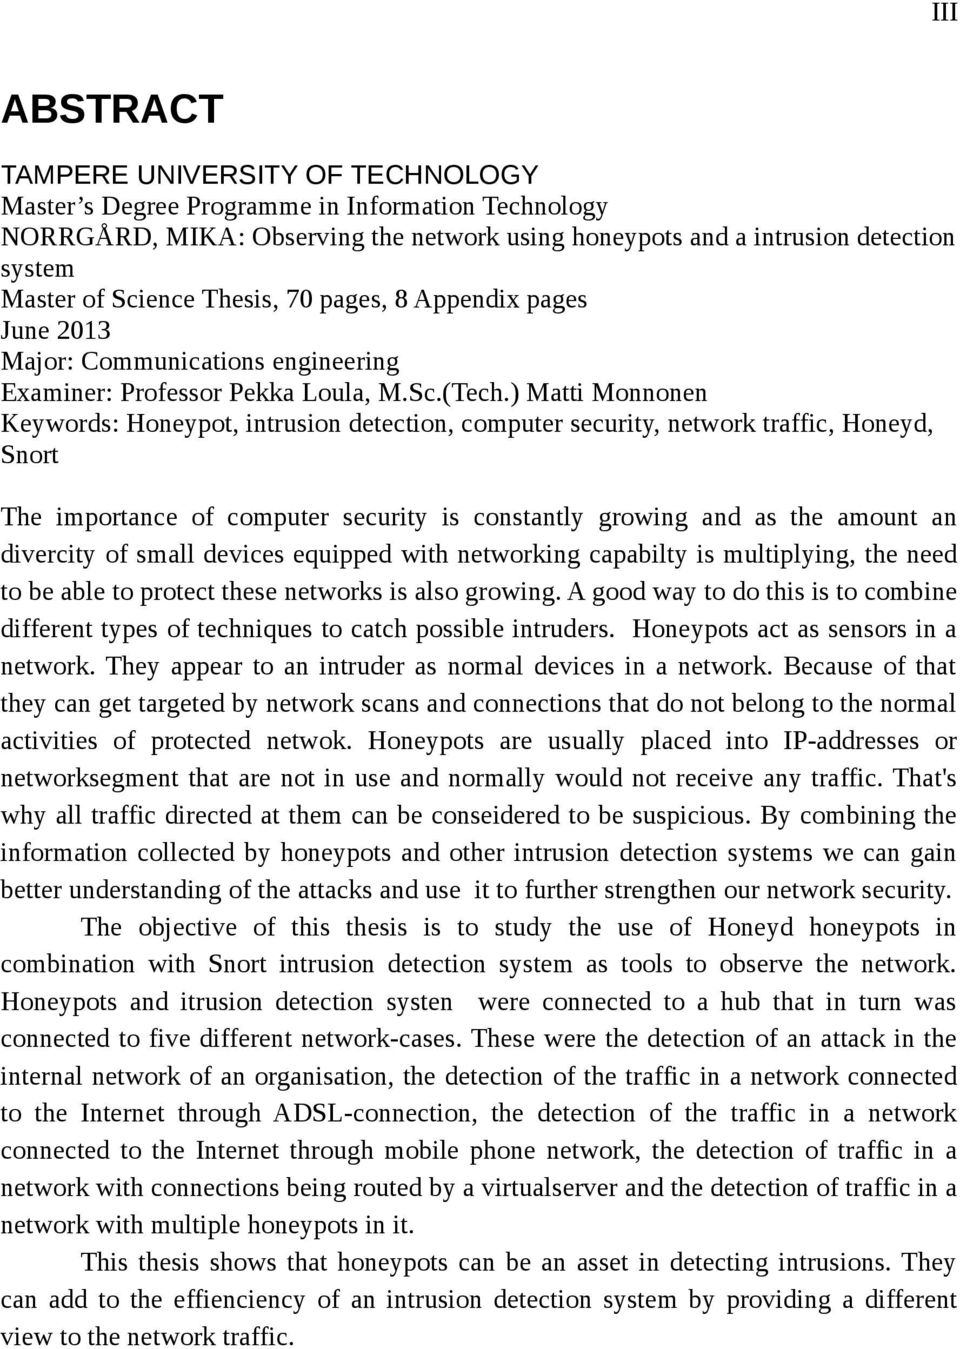 ) Matti Monnonen Keywords: Honeypot, intrusion detection, computer security, network traffic, Honeyd, Snort The importance of computer security is constantly growing and as the amount an divercity of